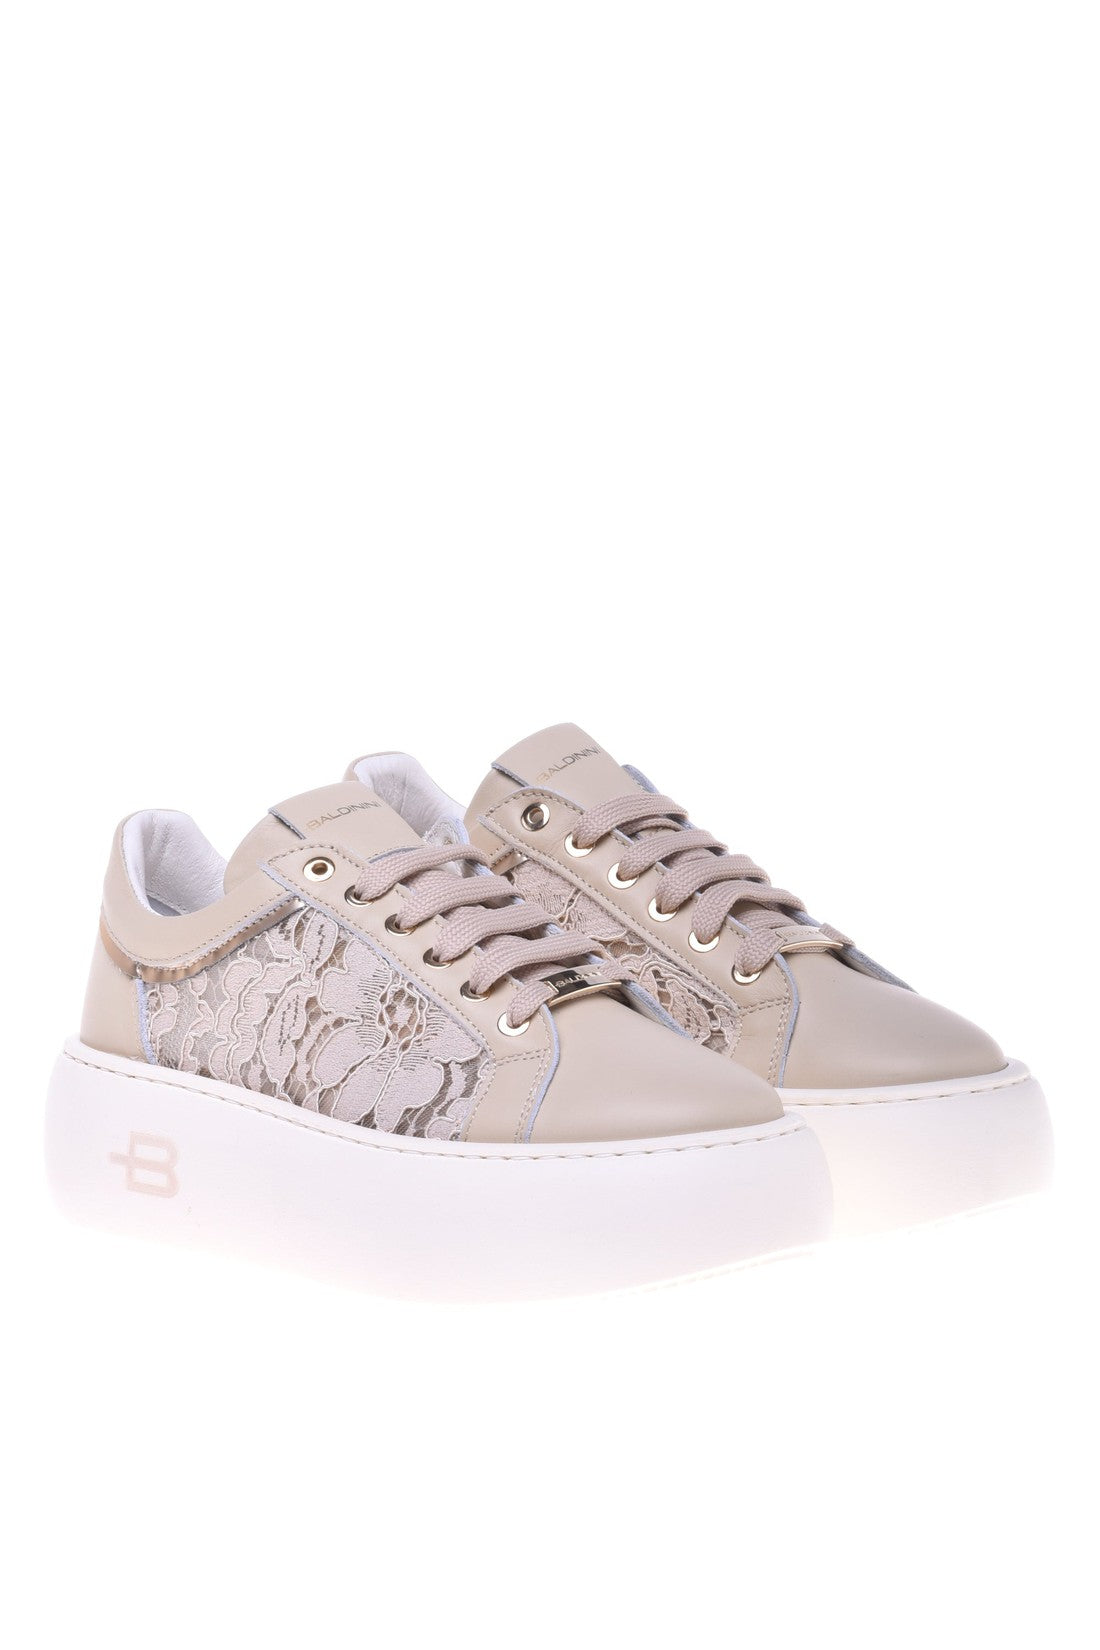 Sneaker in beige nappa leather and lace